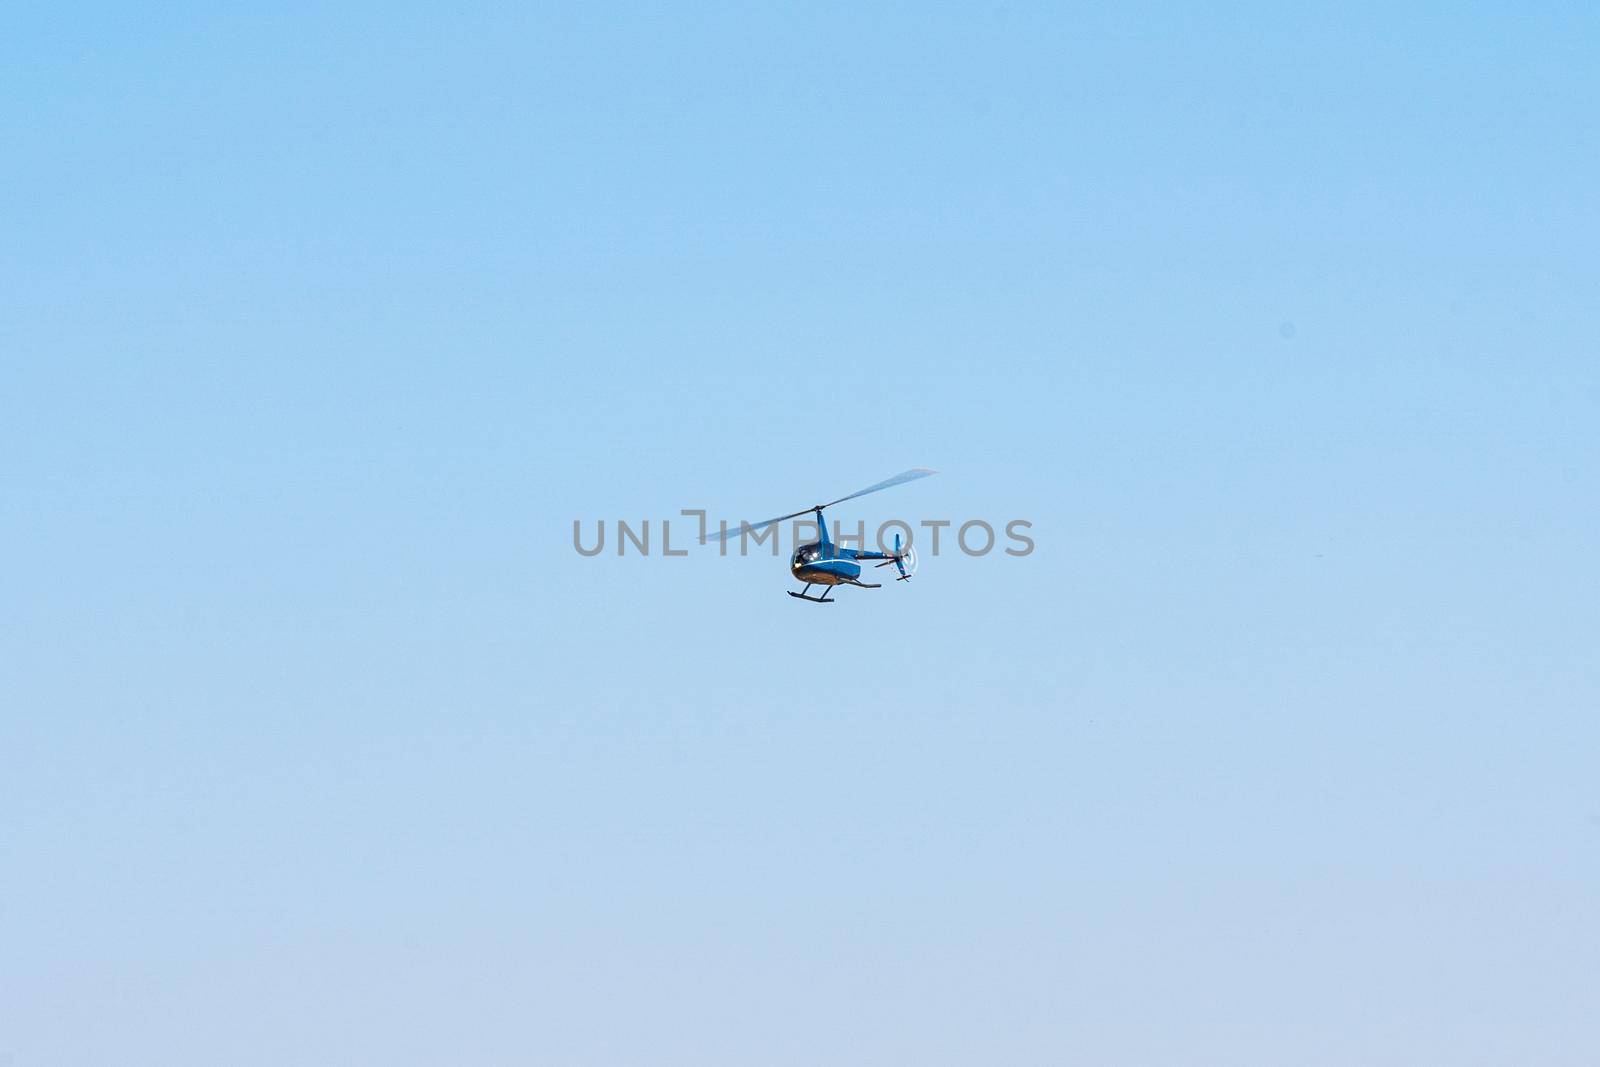 Helicopter flying in the blue sky during a sunny day